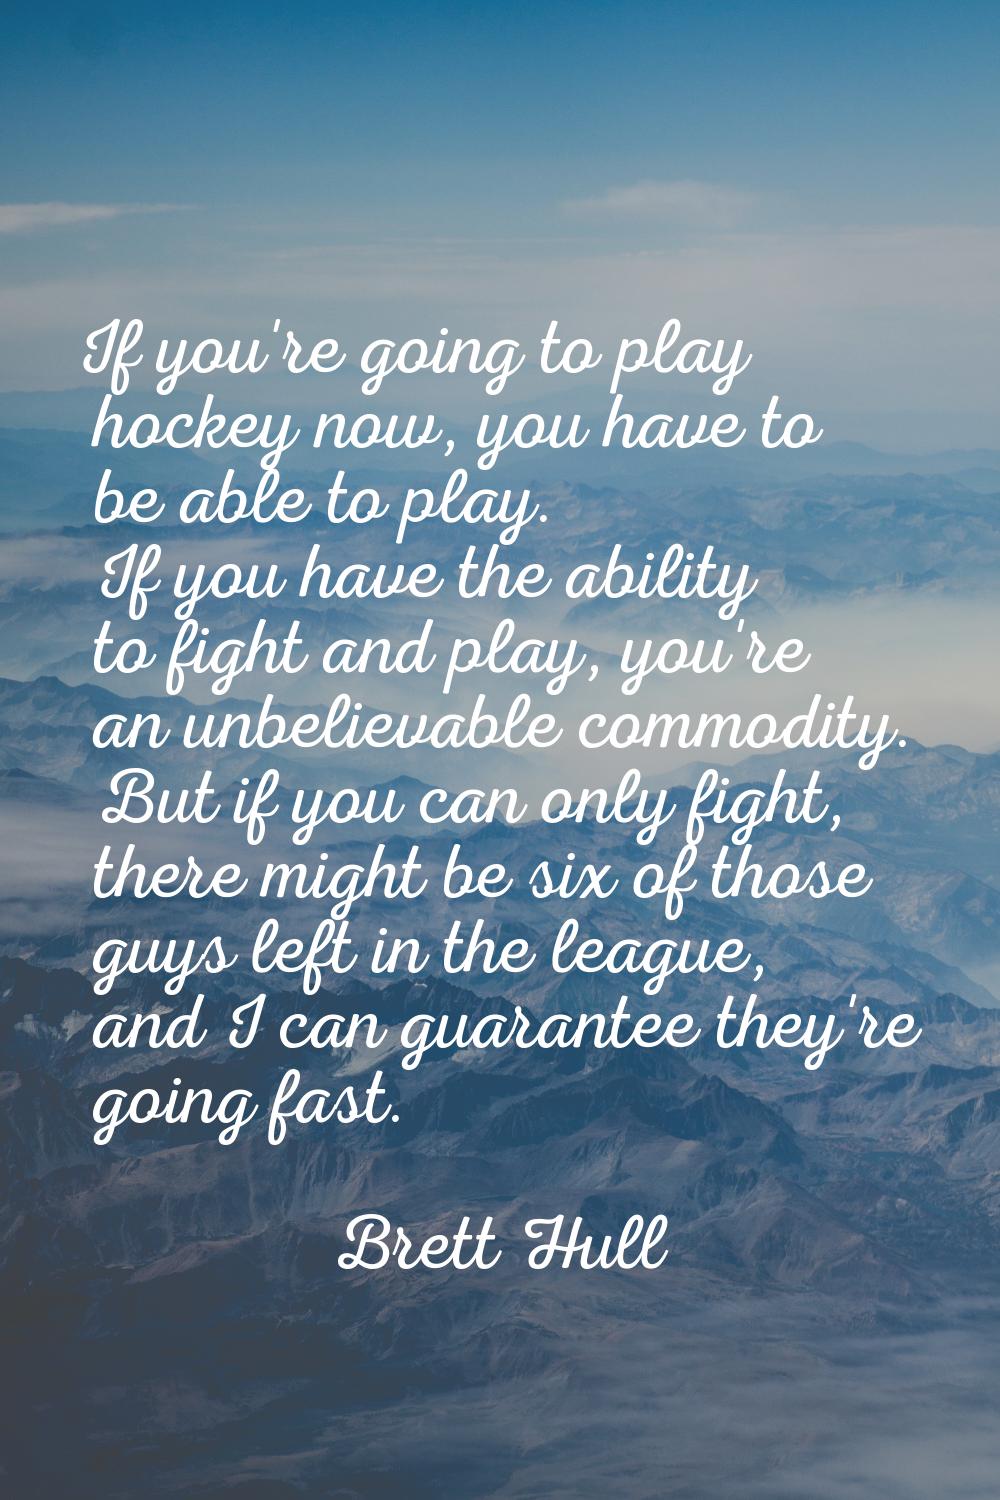 If you're going to play hockey now, you have to be able to play. If you have the ability to fight a